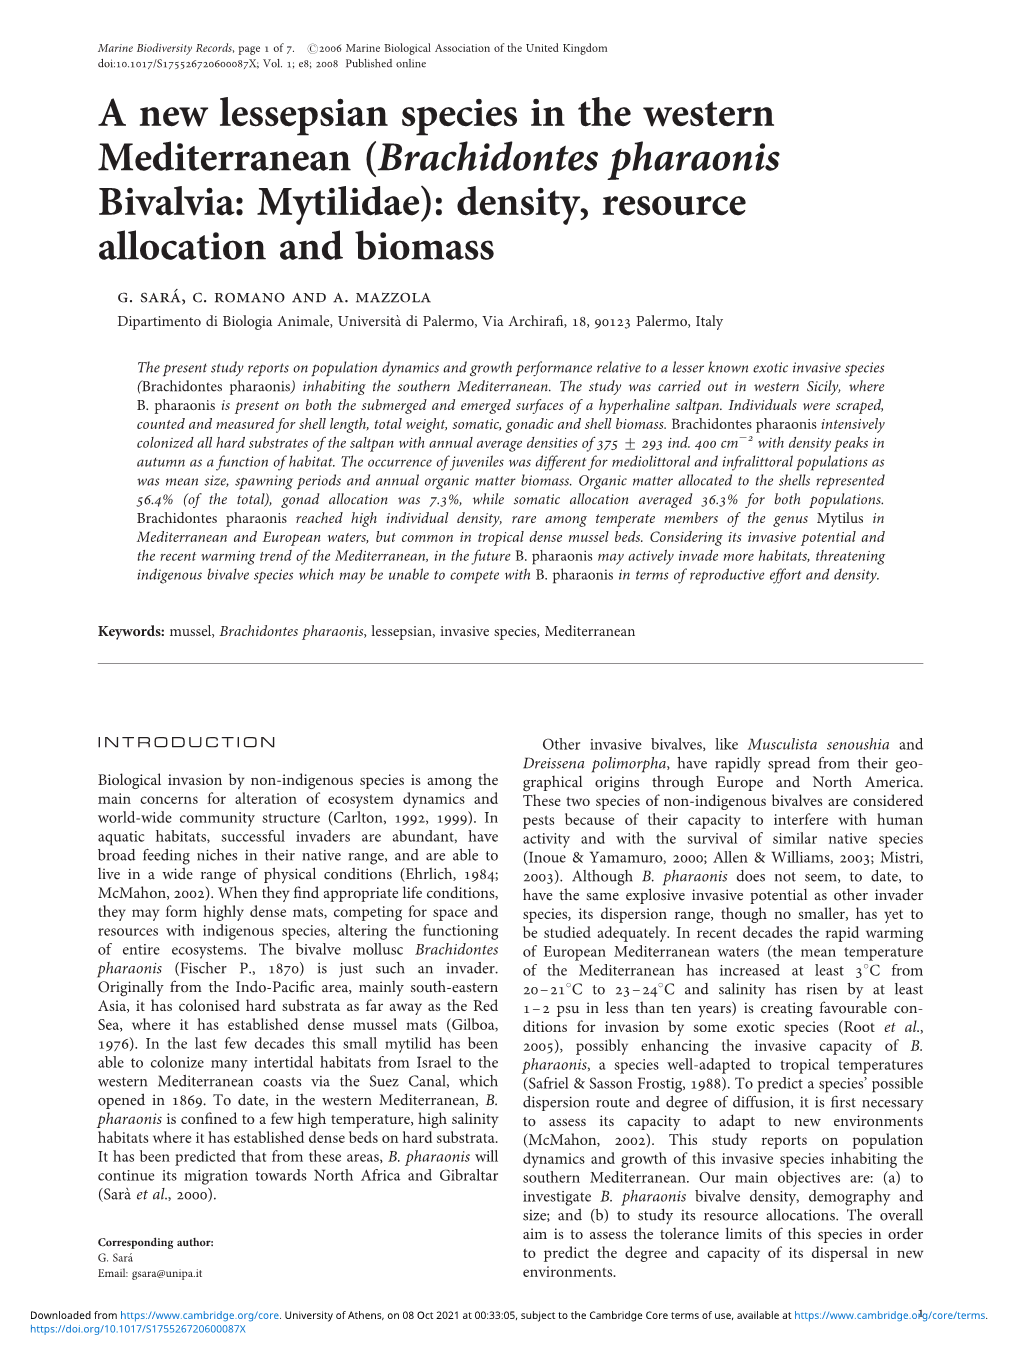 A New Lessepsian Species in the Western Mediterranean (Brachidontes Pharaonis Bivalvia: Mytilidae): Density, Resource Allocation and Biomass G